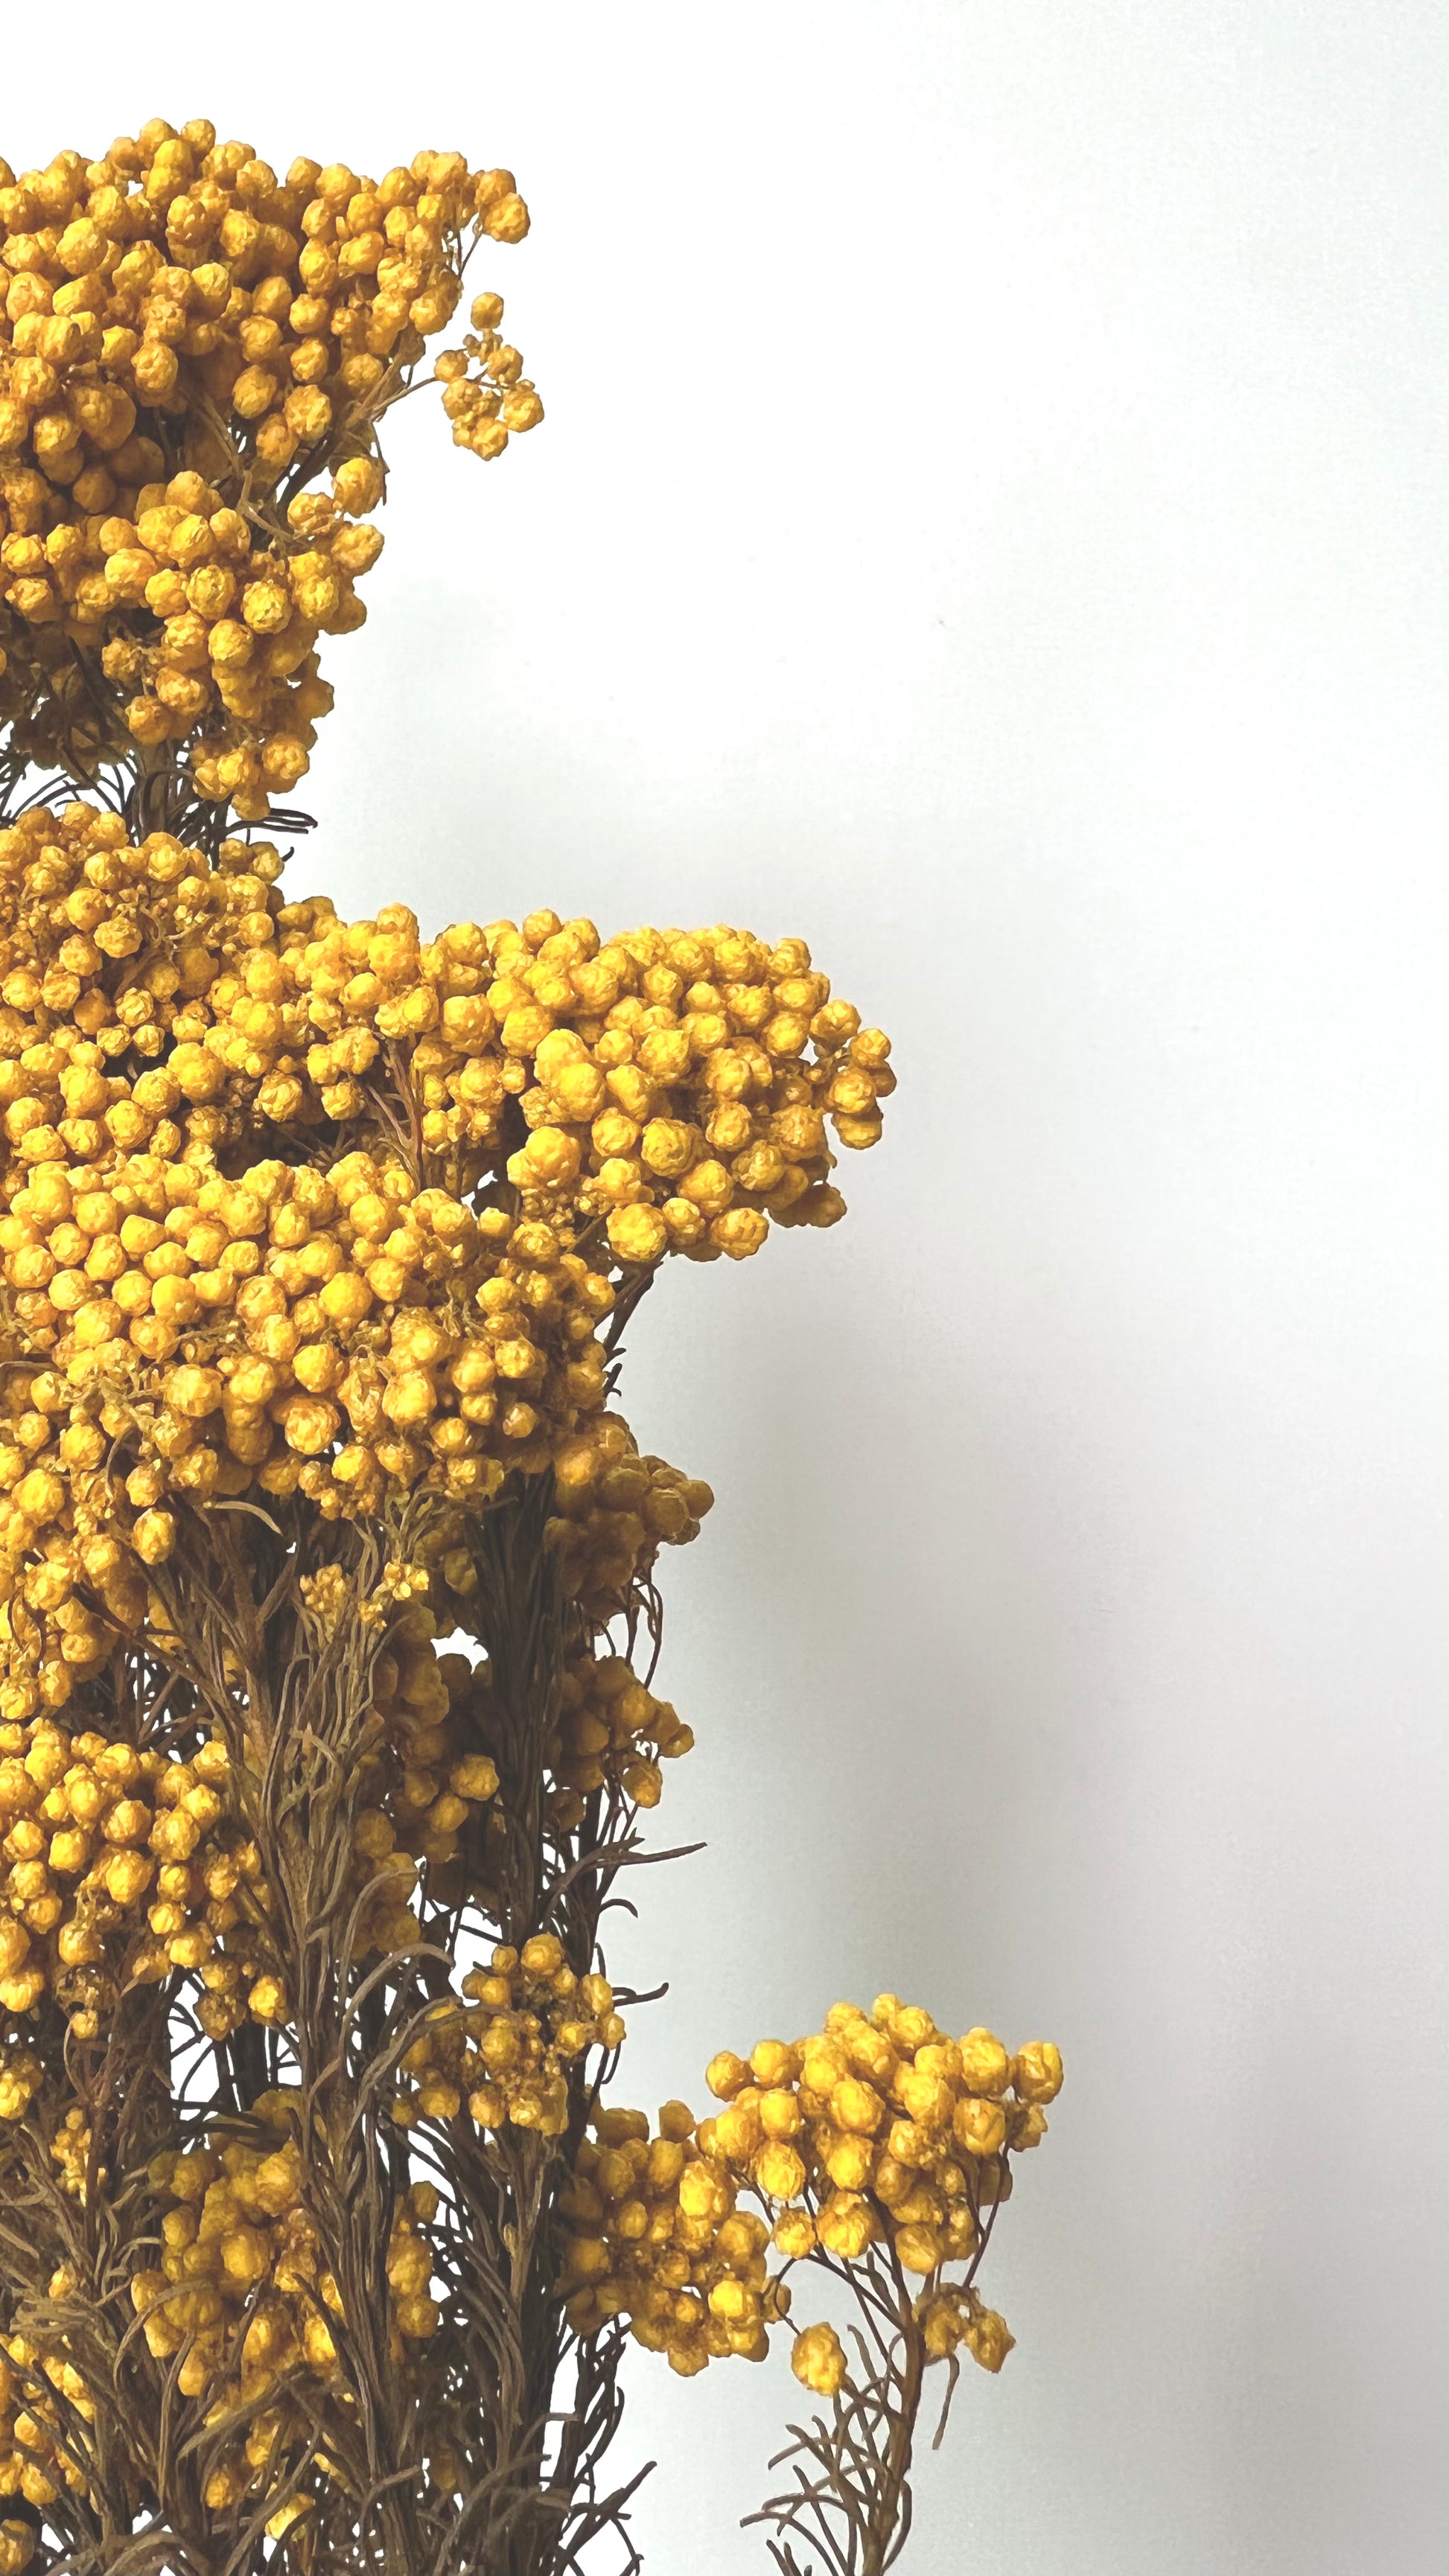 Dried, little yellow flowers with brown stems against a white background